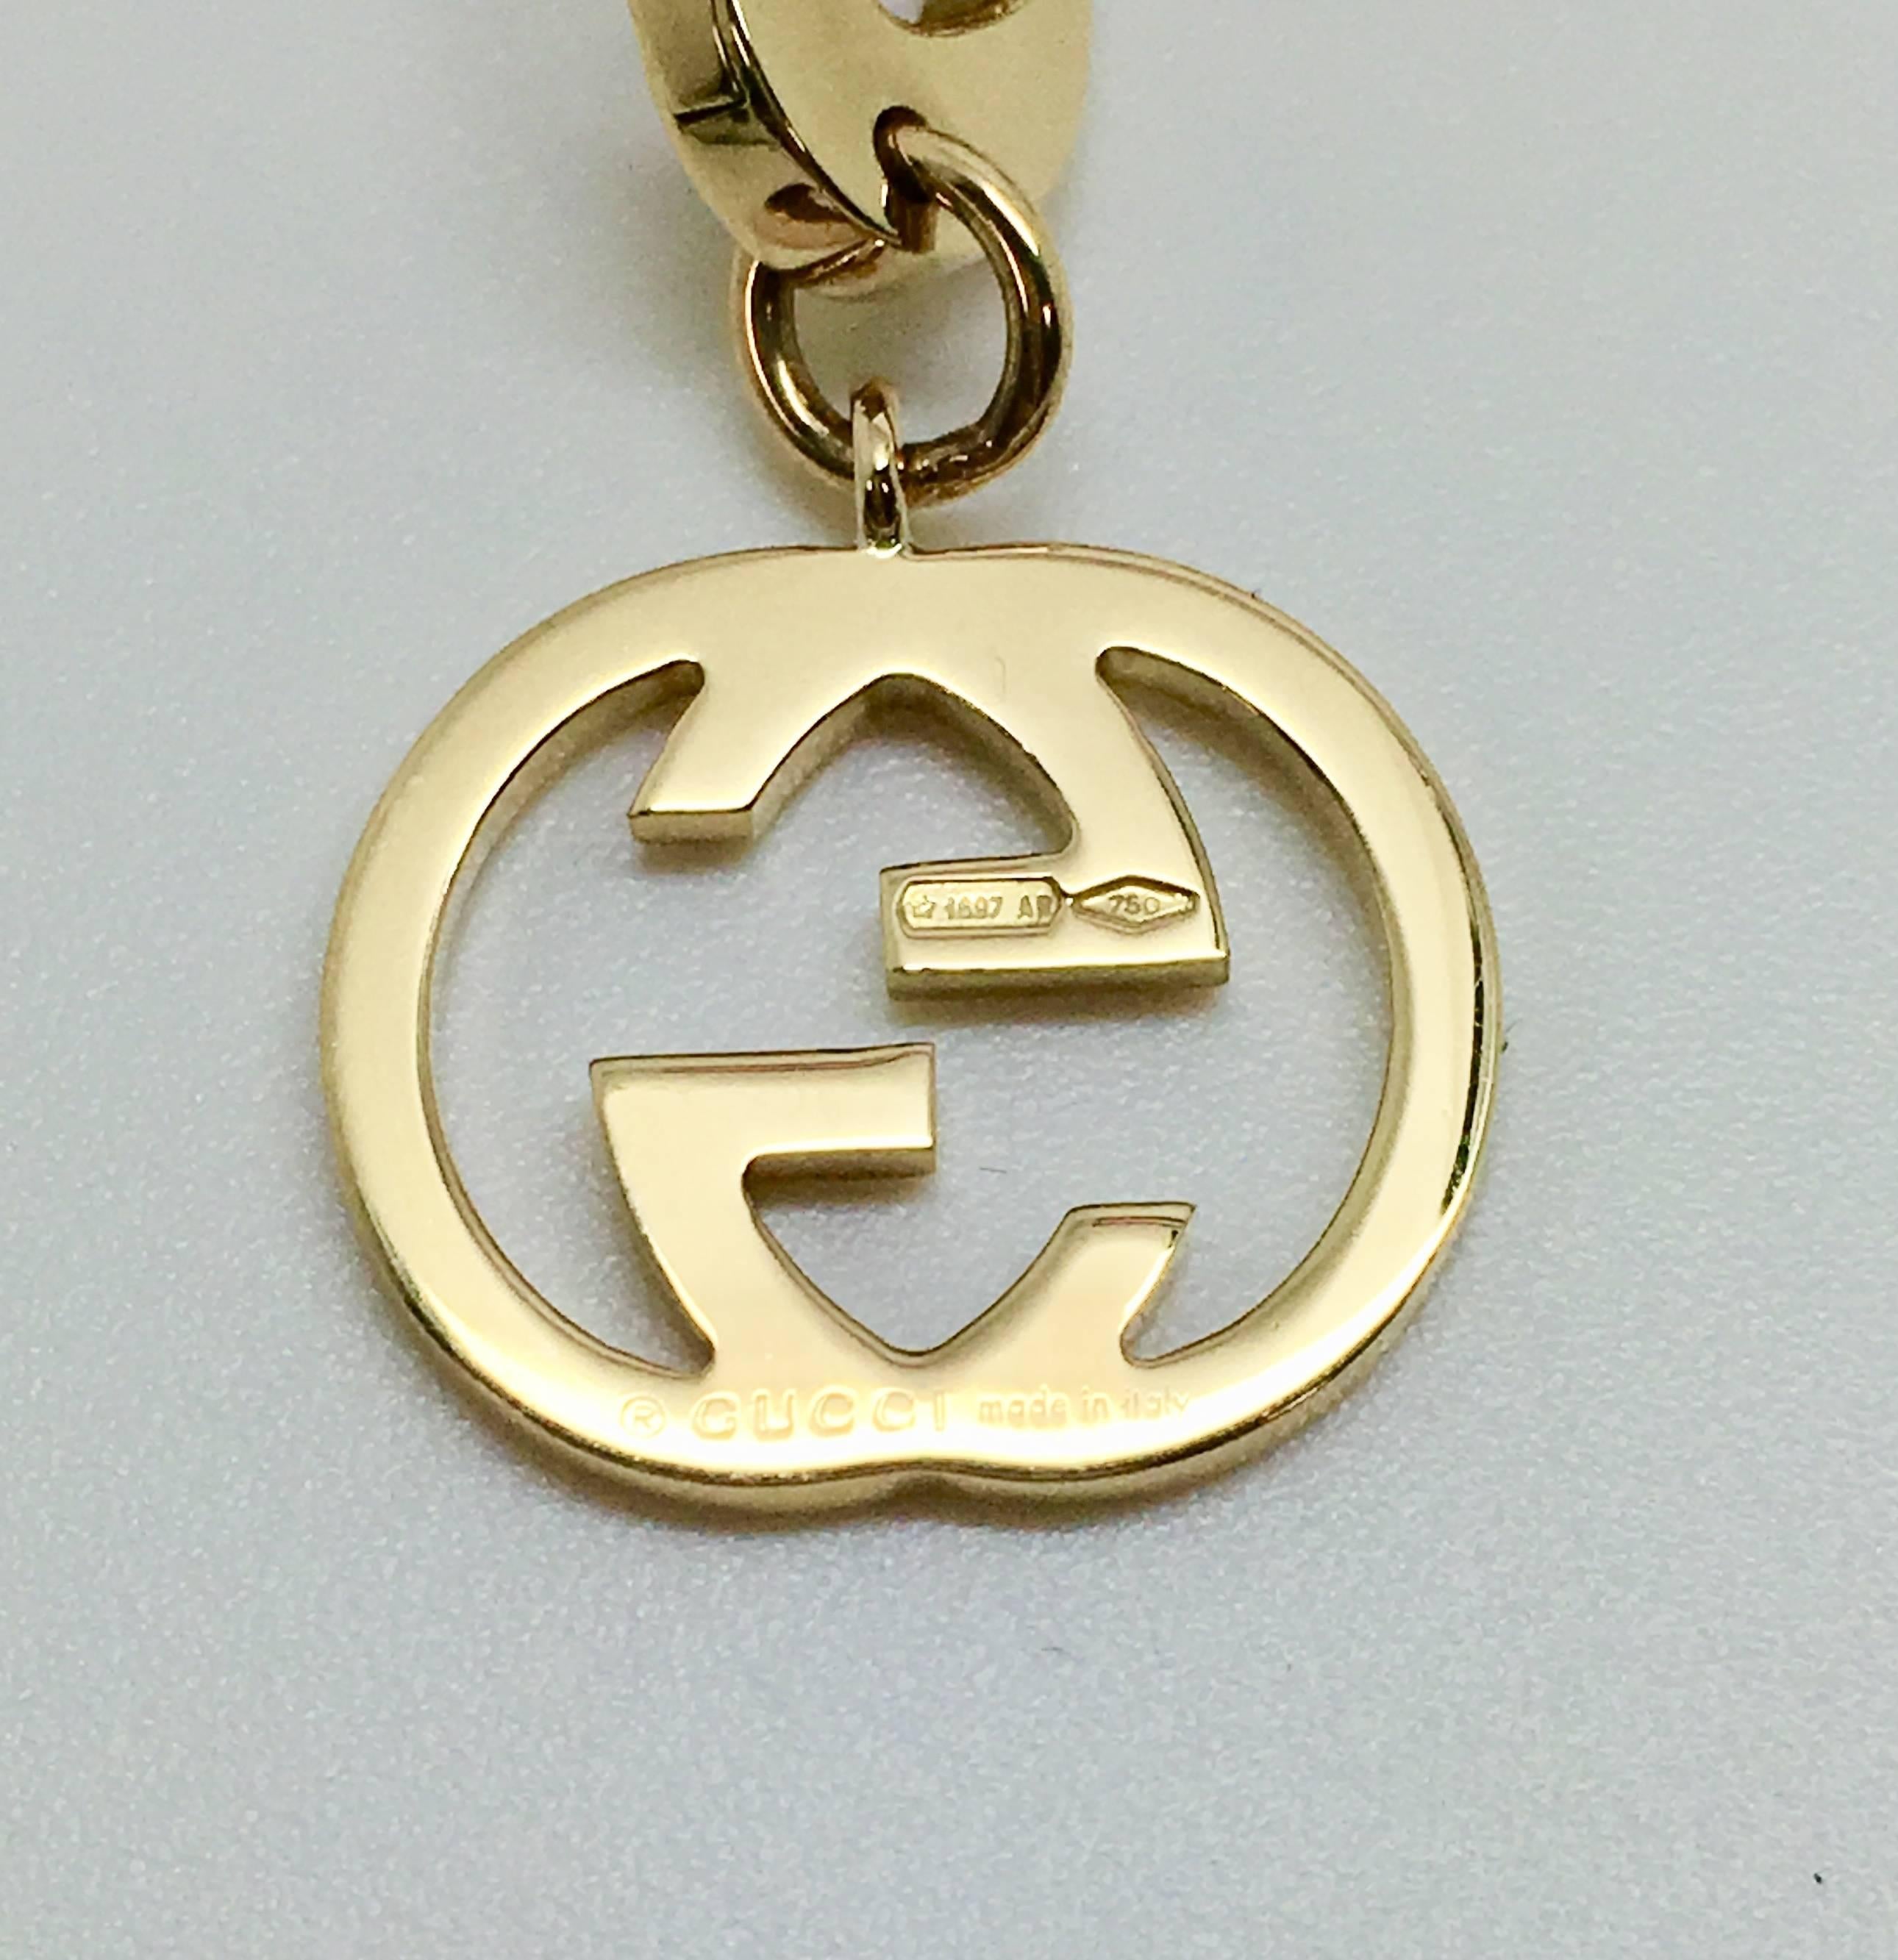 Gucci link bracelet in 18 karat yellow gold, classic Gucci charm completes this beautiful piece. It weighs 19.7 grams and is 8 inches in length and pre-owned.